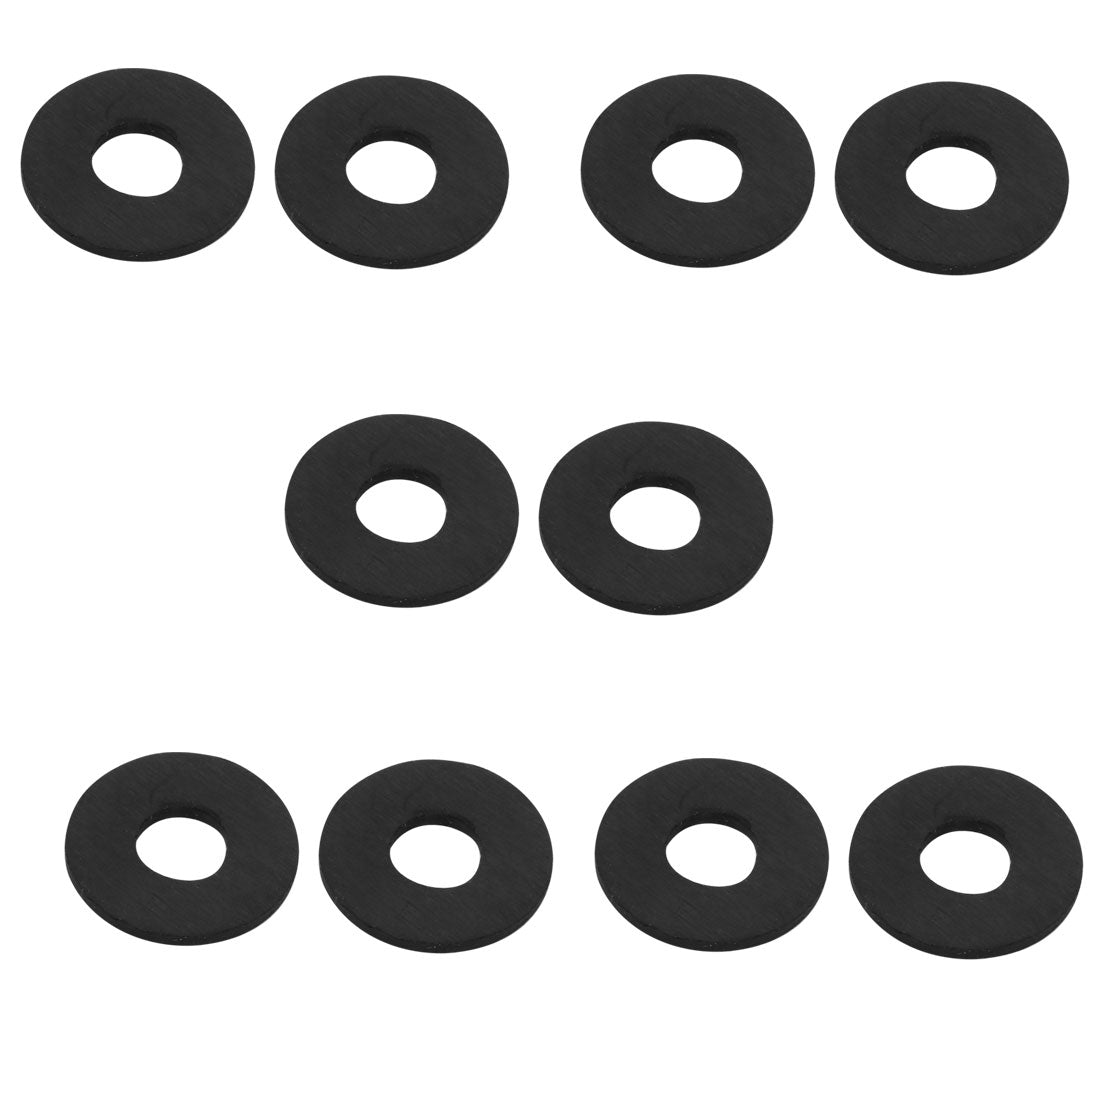 uxcell Uxcell 10Pcs 8mm x 20mm x 1.5mm Rubber Oil Sealing O-Rings Washer Gasket Black